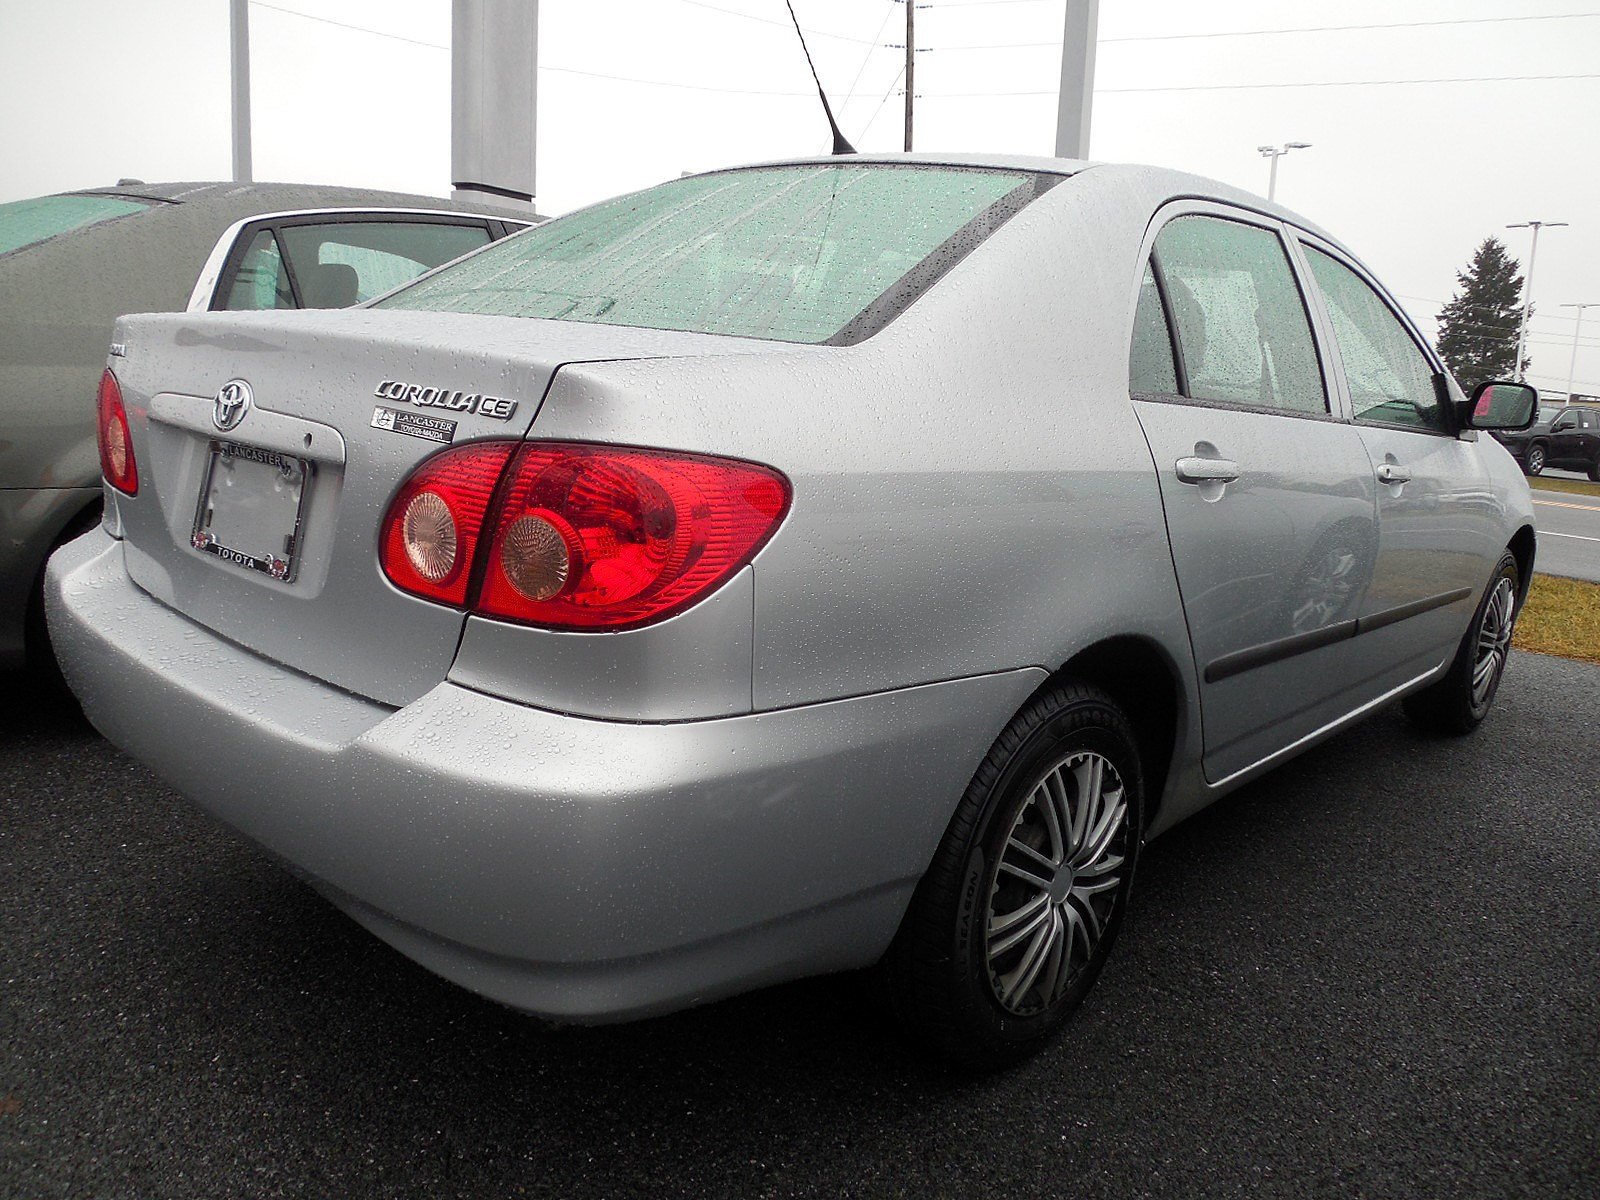 Pre-Owned 2006 Toyota Corolla CE 4dr Car in East Petersburg #UL0025A